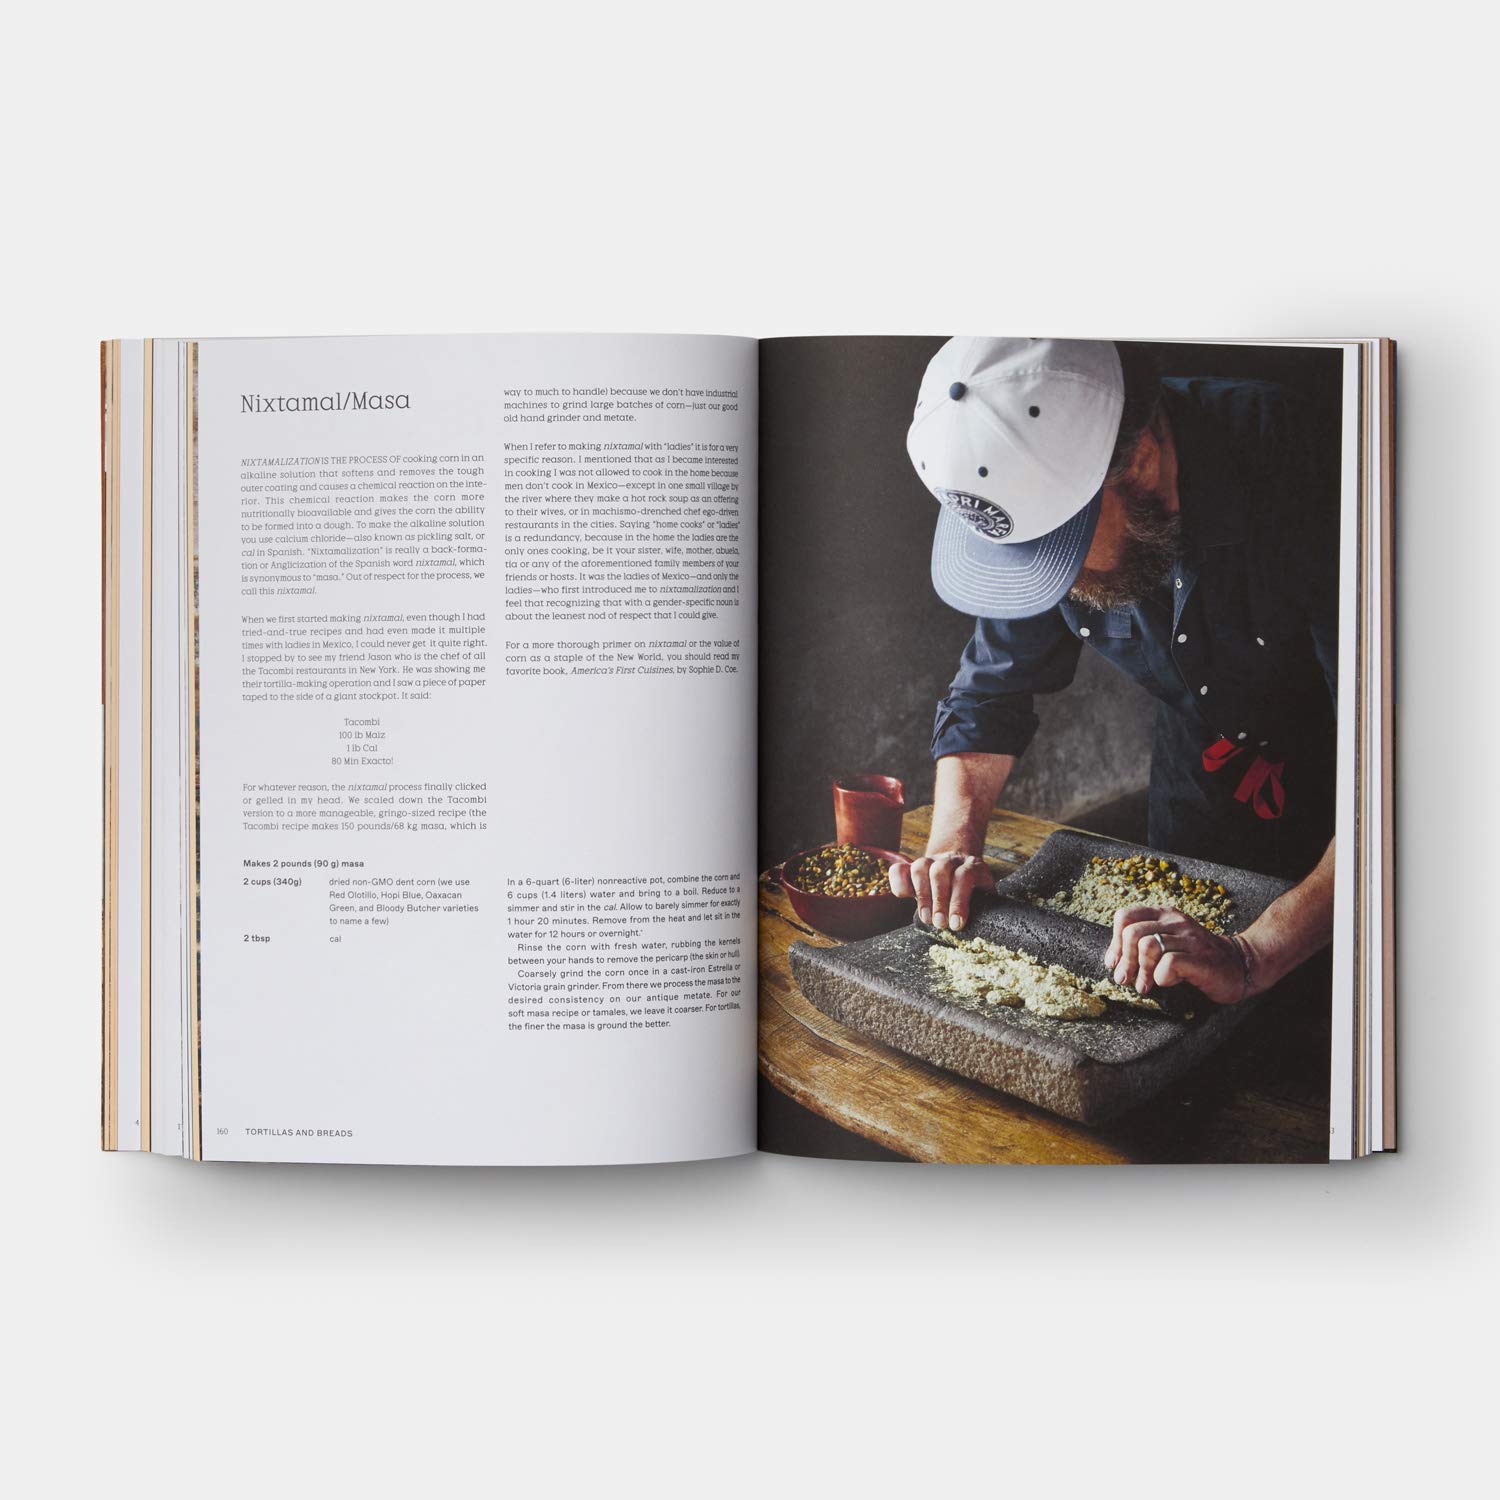 Book | Cooking in Marfa